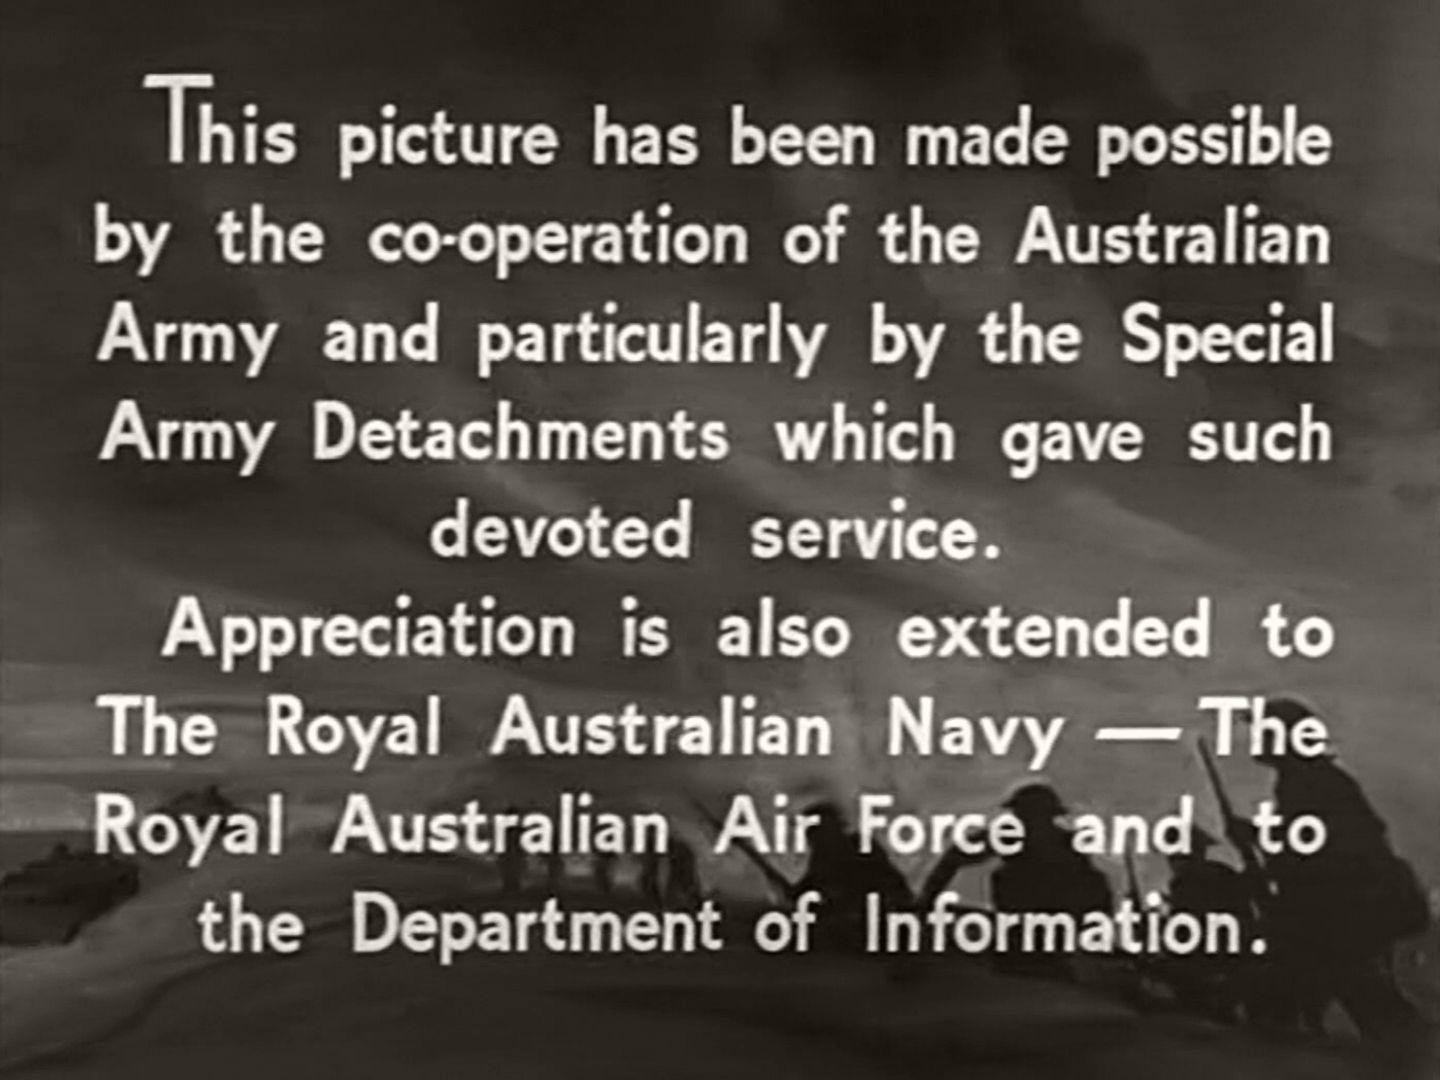 Main title from The Rats of Tobruk (1944) (2). This picture has been made possible by the co-operation of the Australian Army and particularly by the Special Army Detachments which gave such devoted service. Appreciation is also extended to The Royal Australian Navy – The Royal Australian Air Force and to the Department of Information